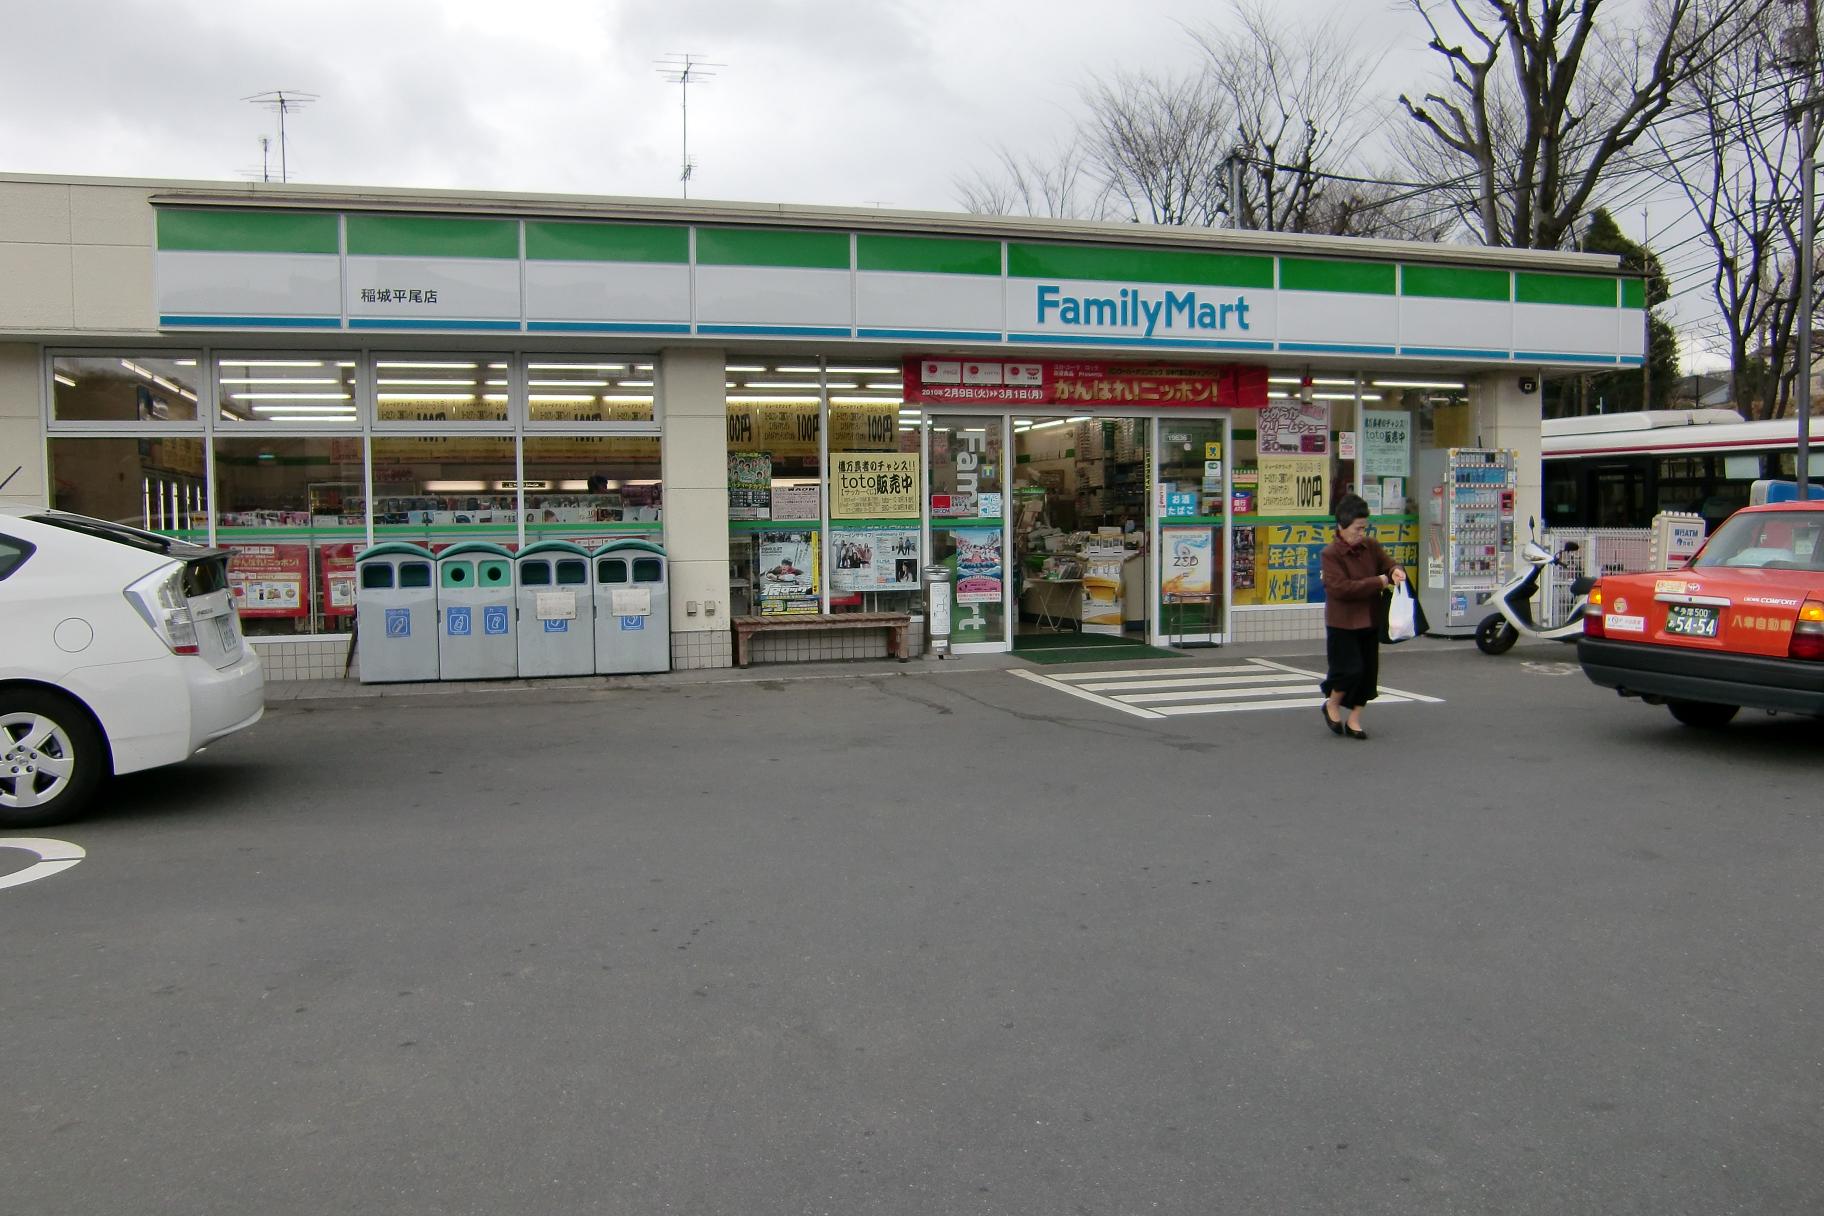 Convenience store. FamilyMart. Fried foods are enriched in addition to the. Until the (convenience store) 250m